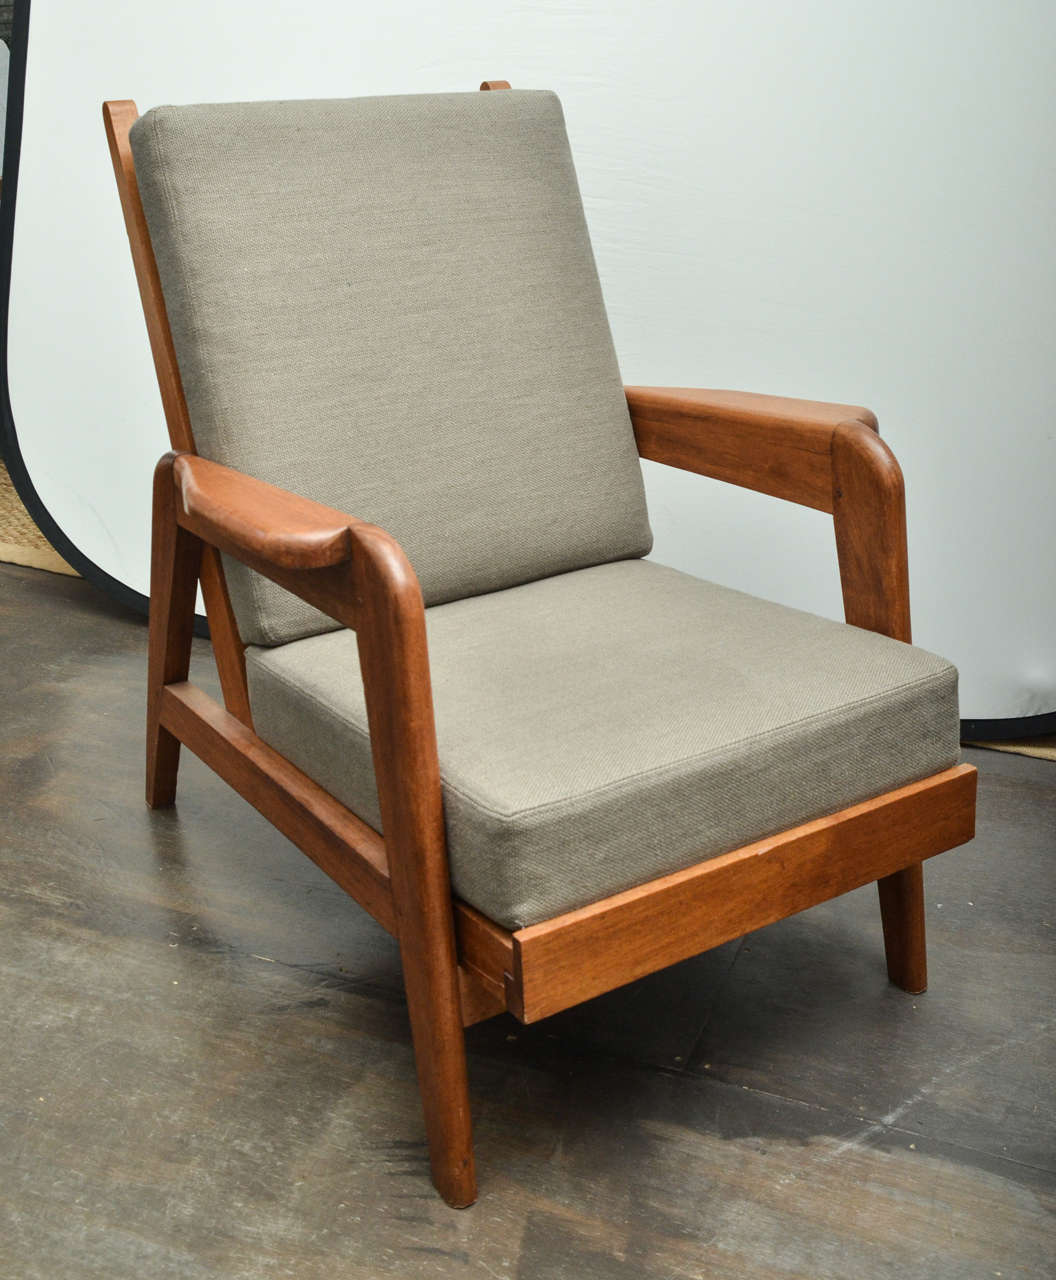 Pair of wooden framed armchairs attributed to Pierre Guariche. Newly upholstered in a taupe linen. Excellent condition.